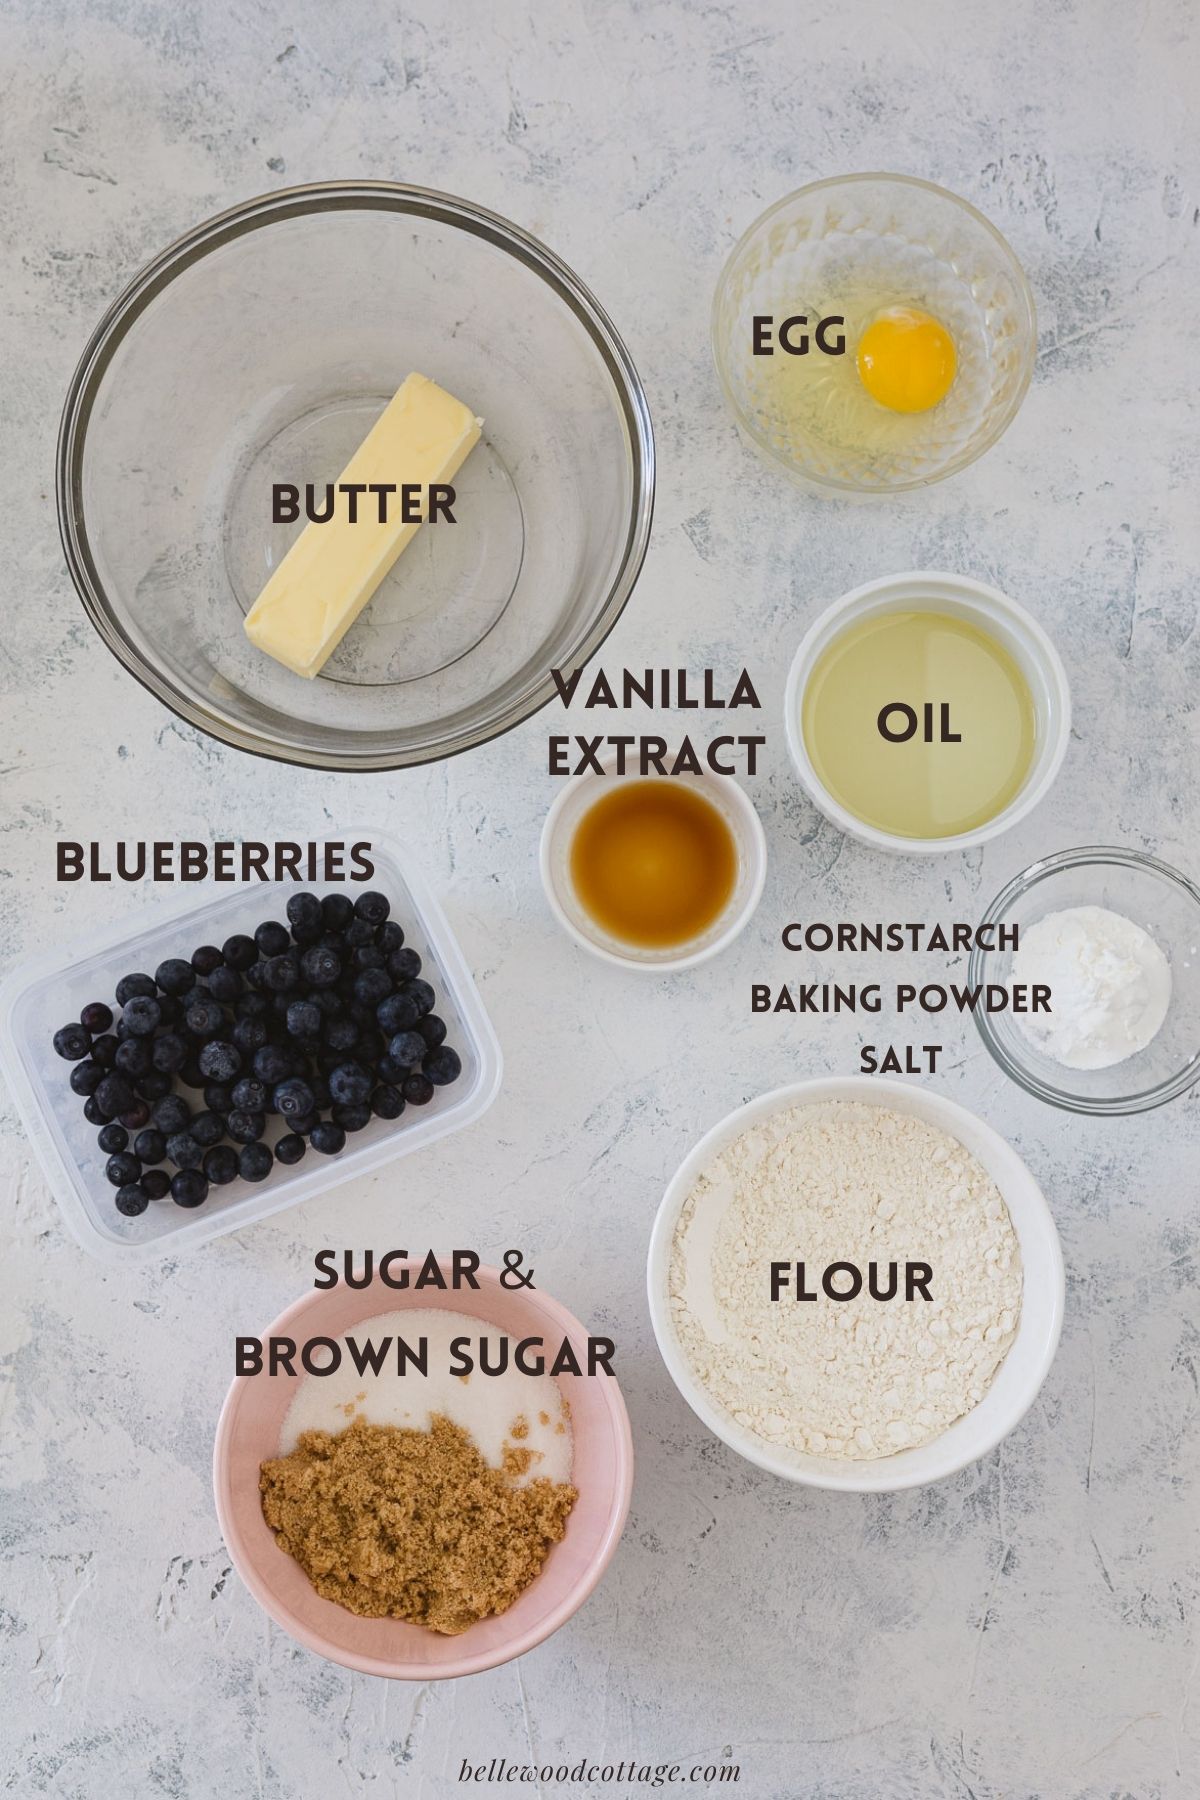 Labeled ingredients for blueberry muffin cookies: butter, egg, oil, vanilla extract, blueberries, cornstarch, baking powder, salt, sugar and brown sugar.